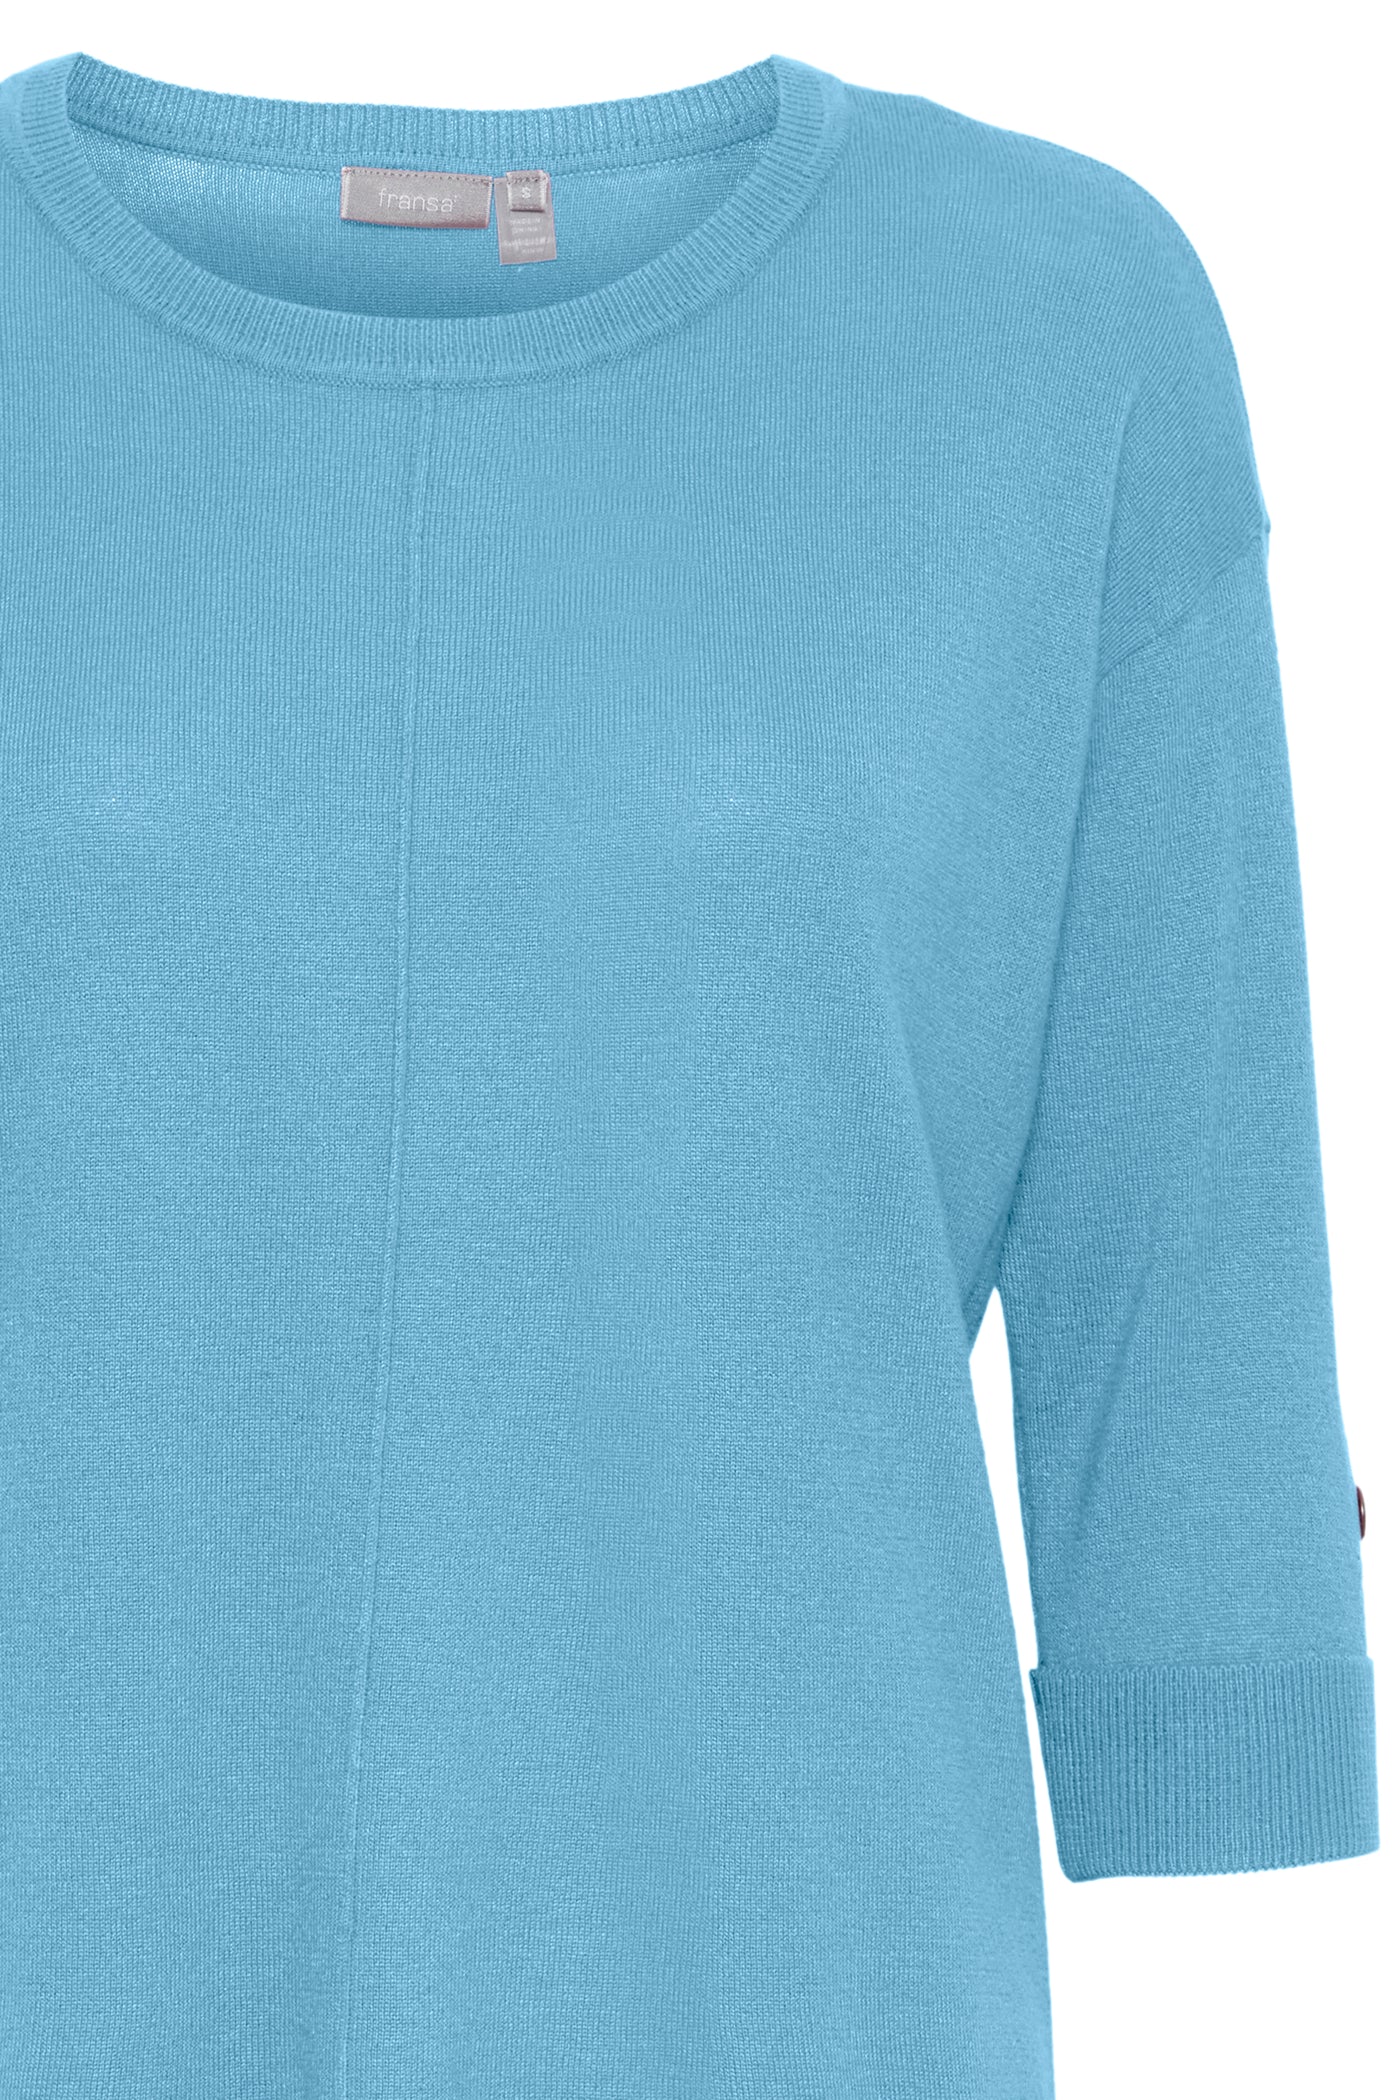 Besmock pullover by Fransa - ethereal blue